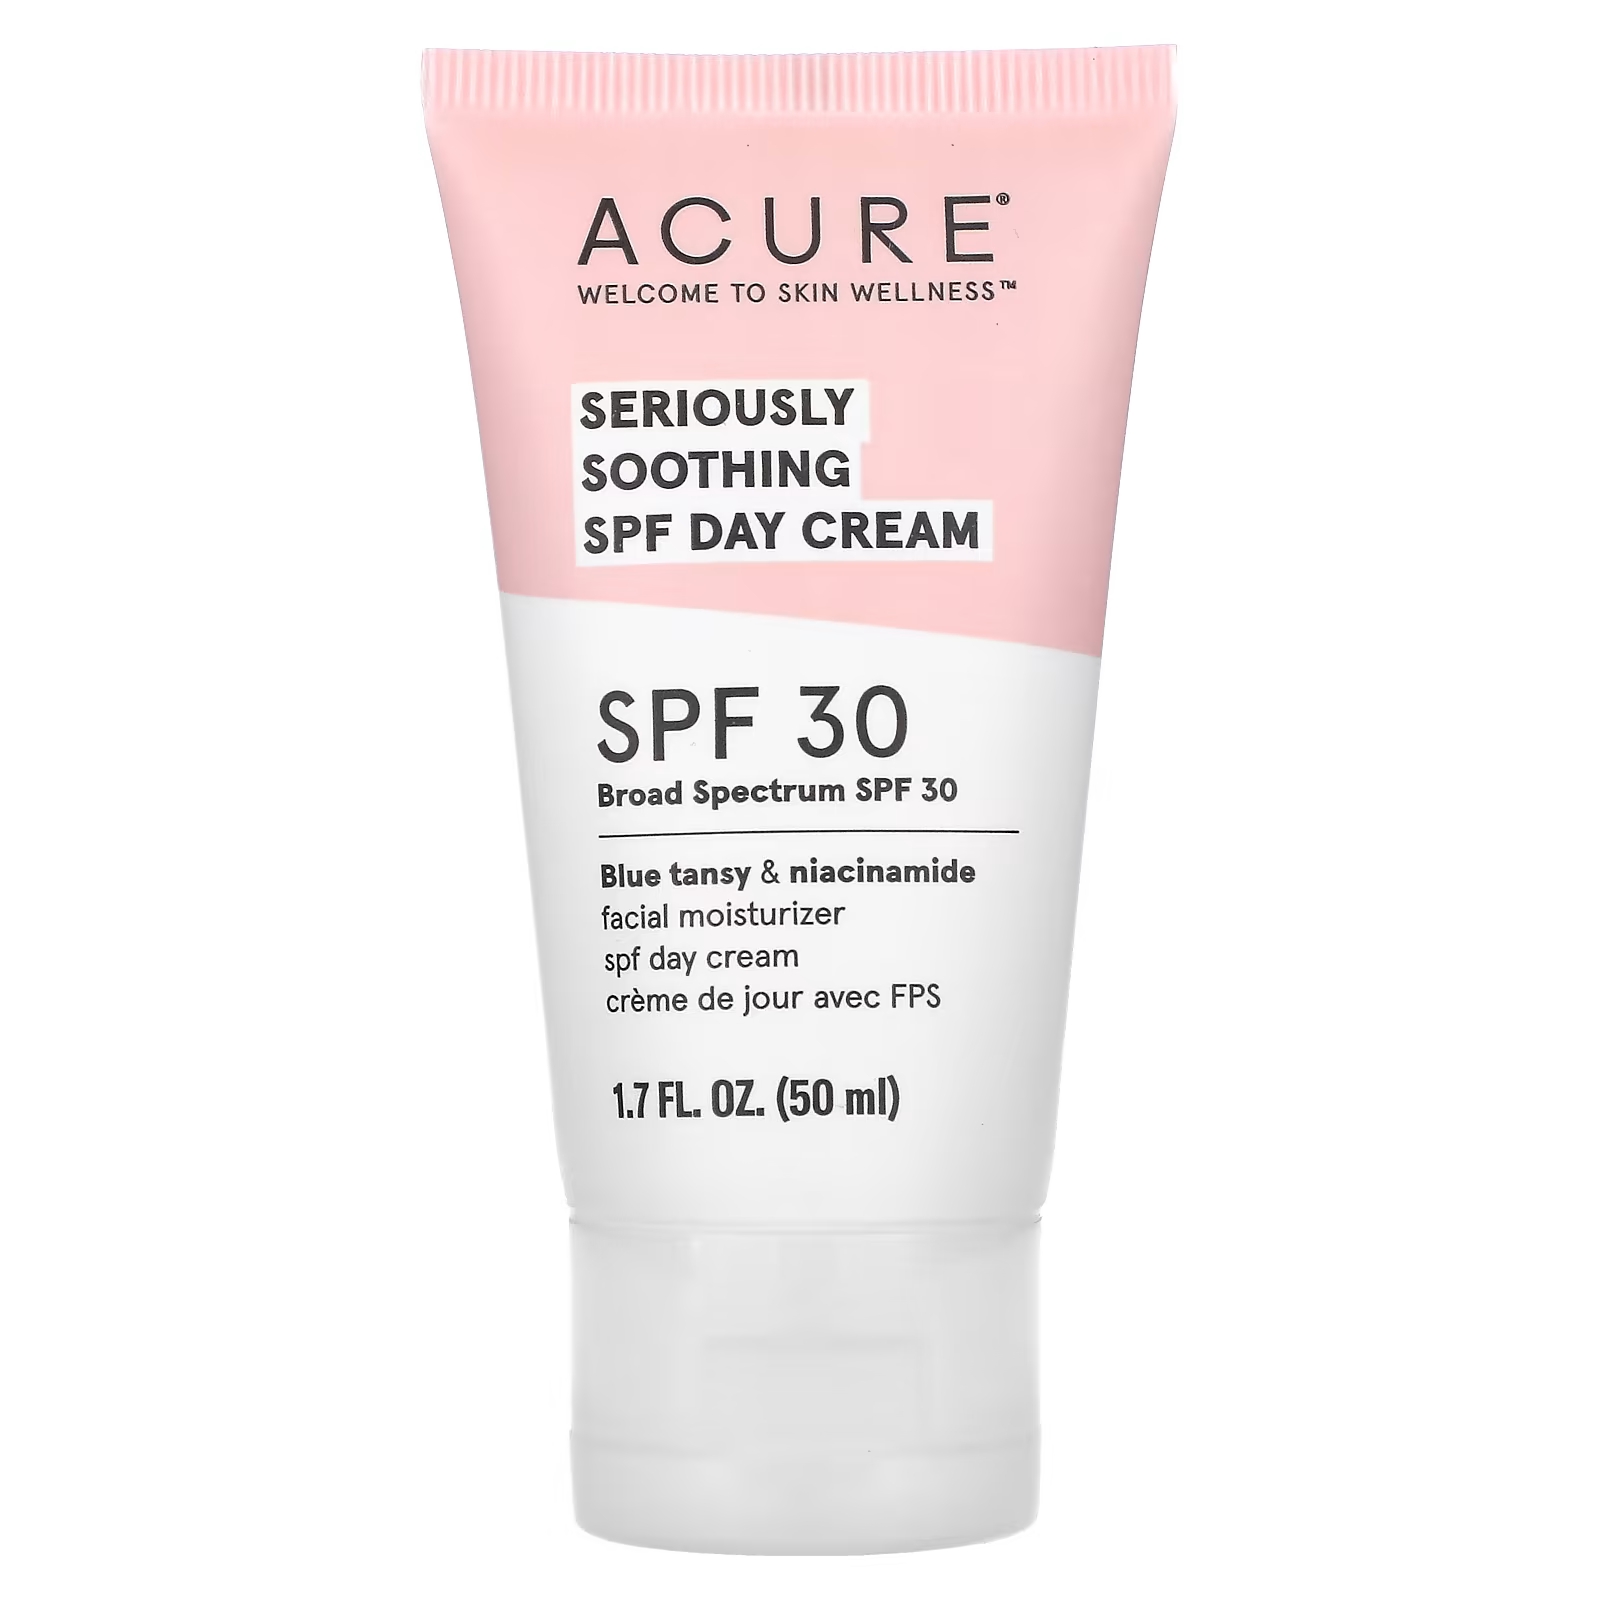 Дневной крем ACURE Seriously Soothing, SPF 30, 50 мл. цена и фото